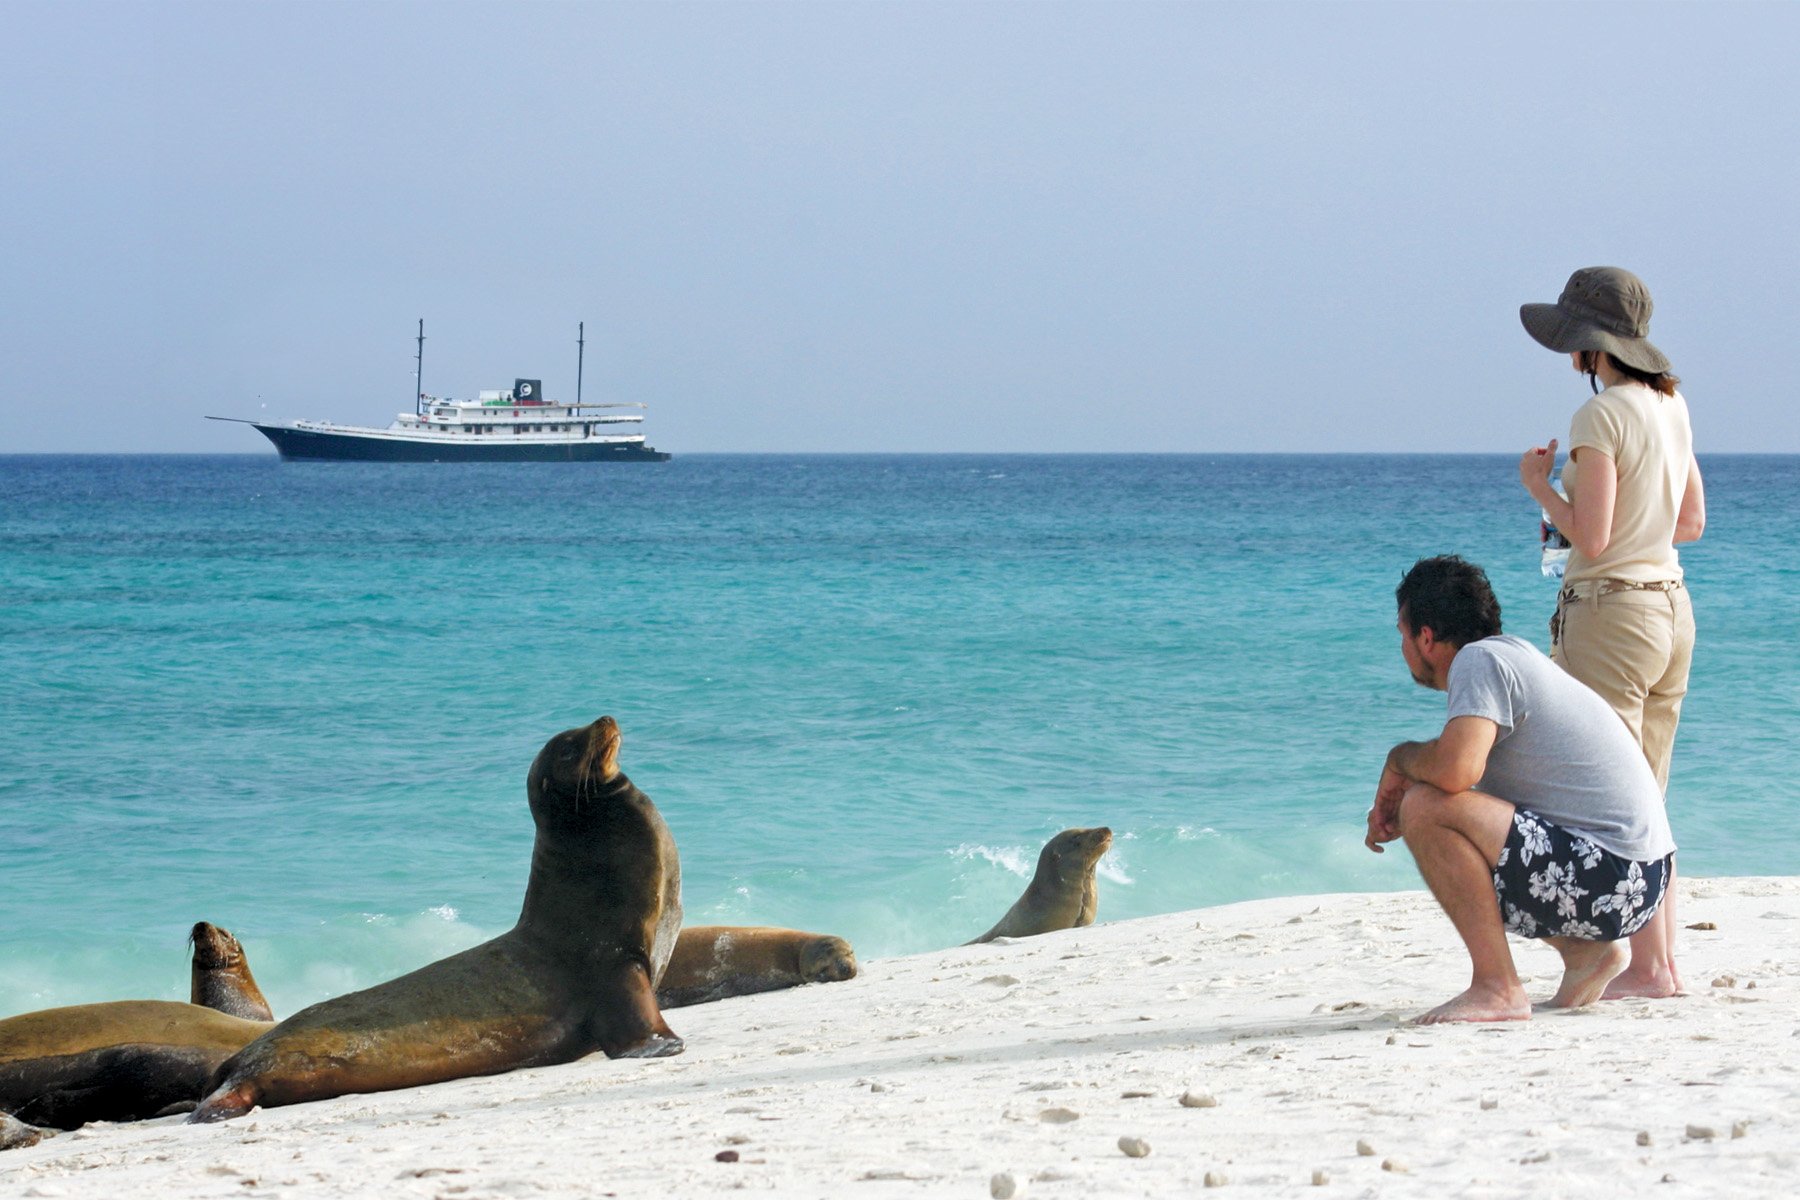 Wildlife Encounters in the Galapagos Islands